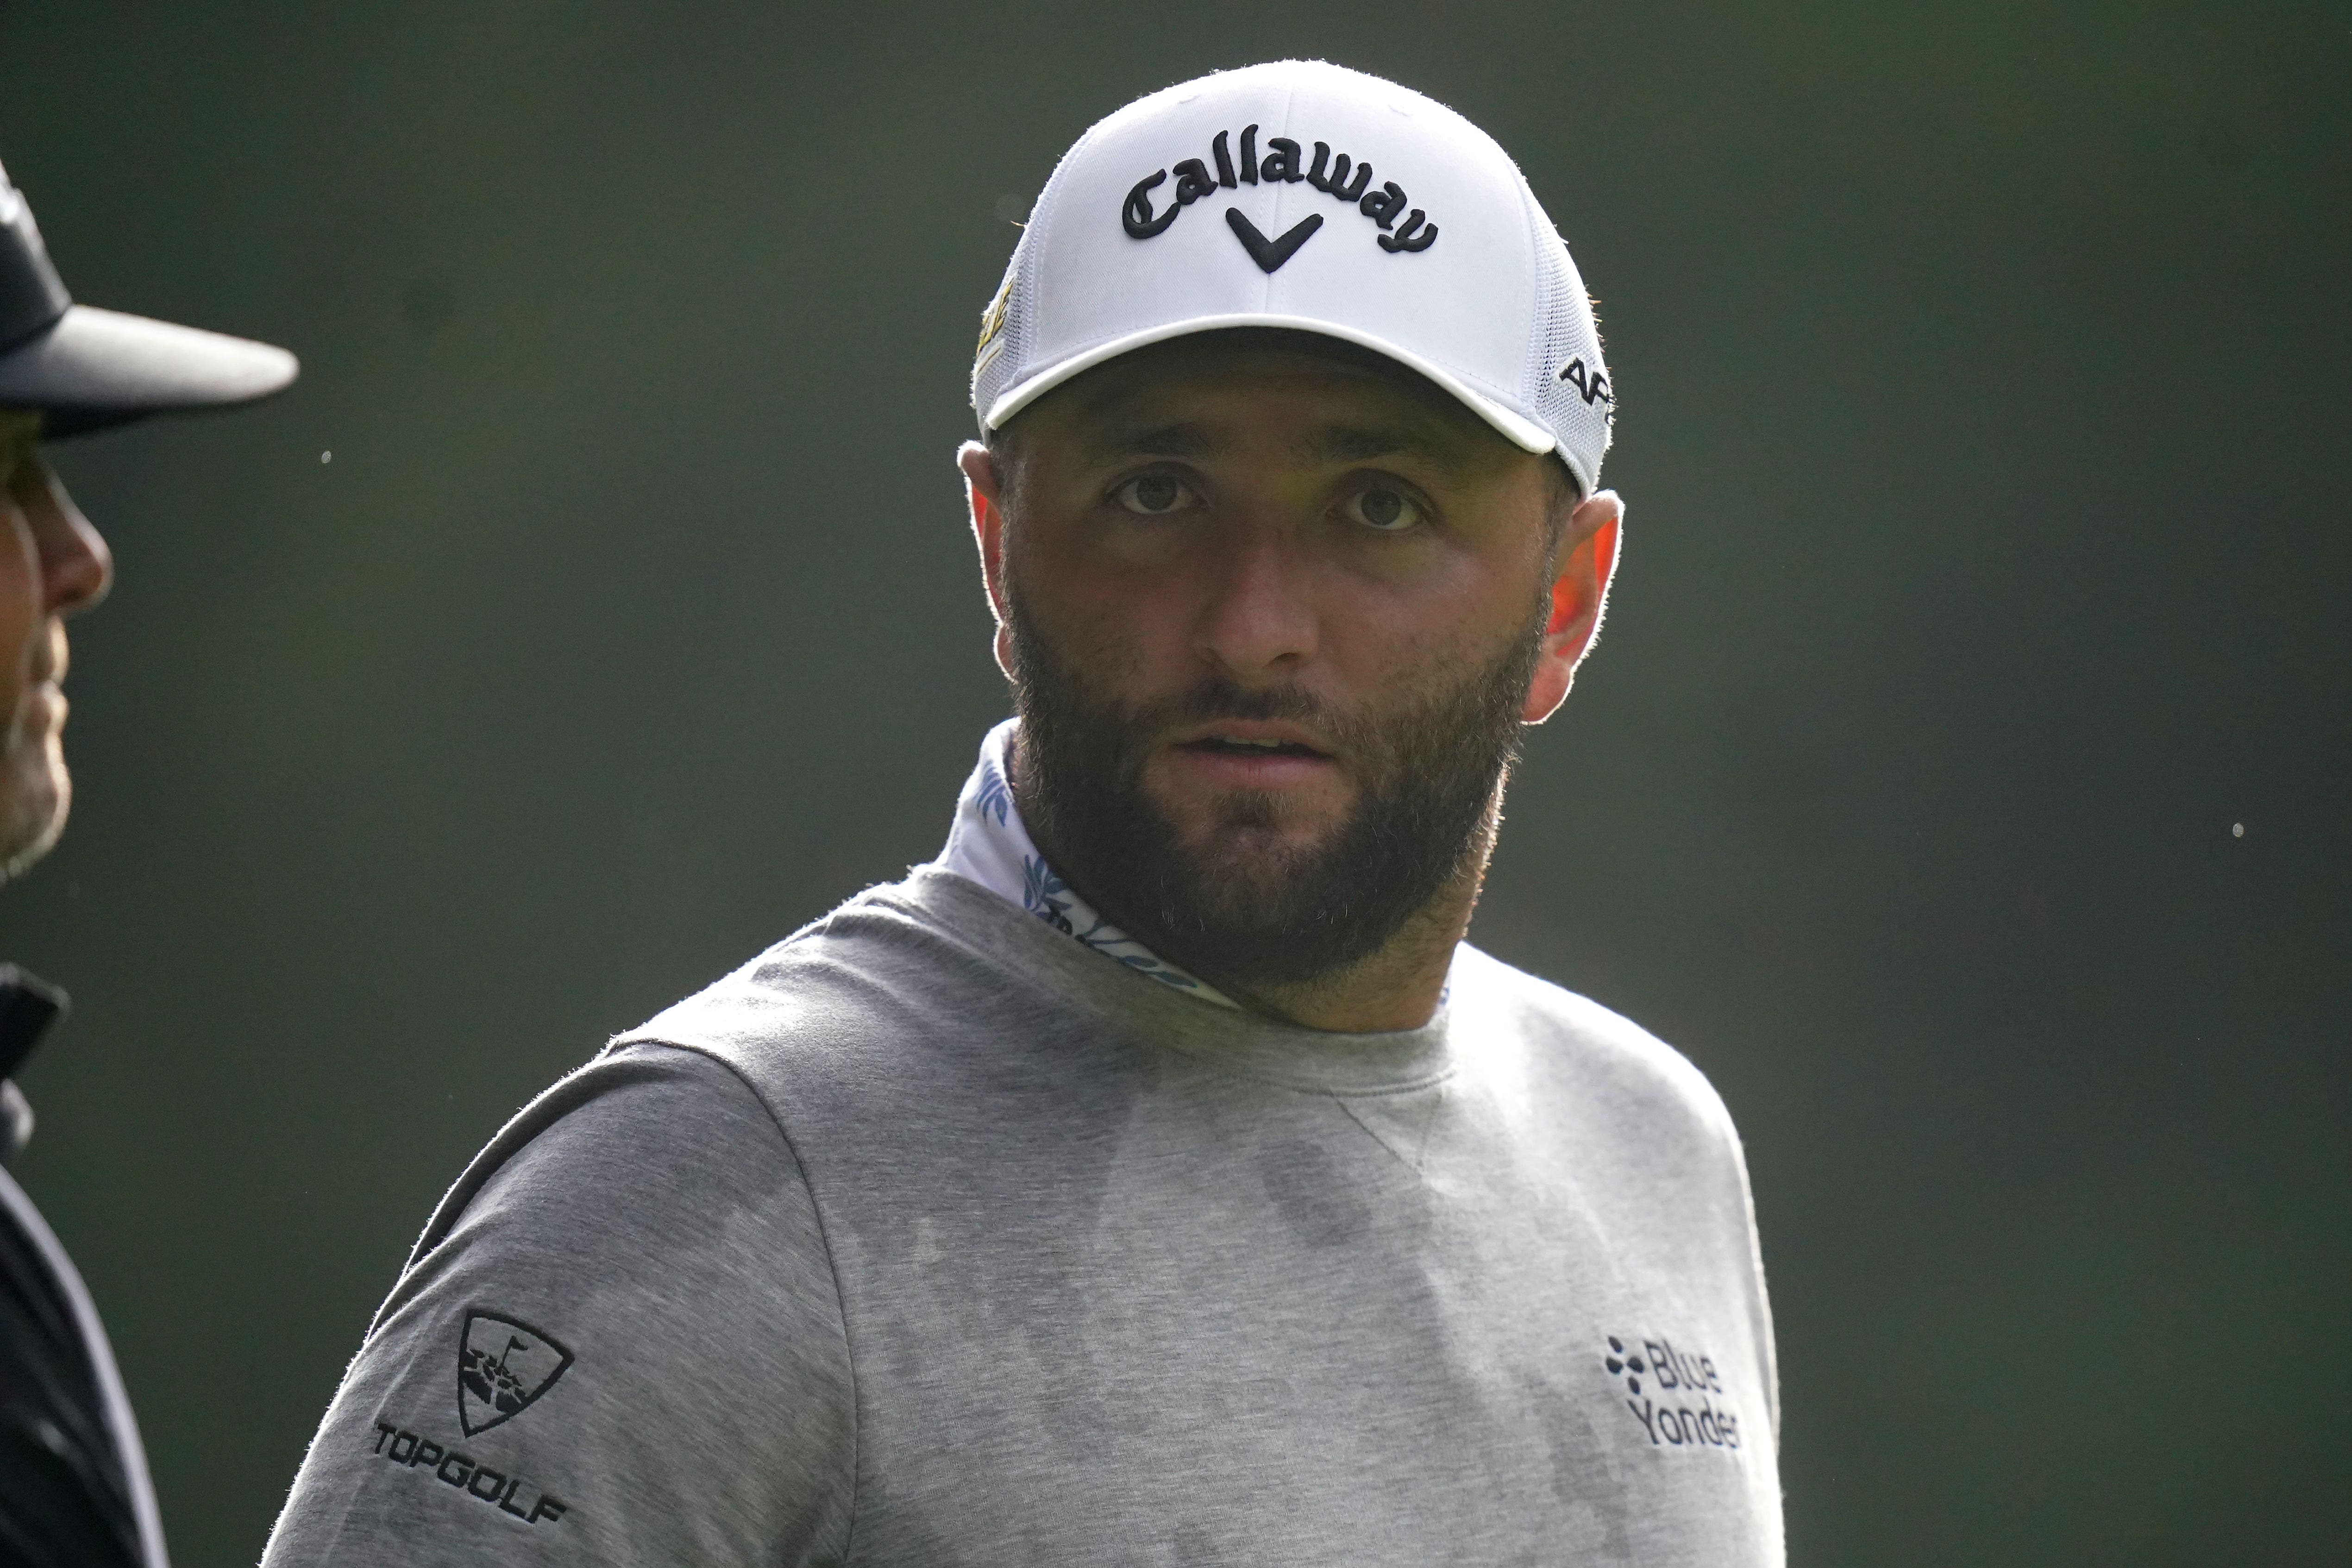 Jon Rahm eyeing the biggest prizes after major disappointment last